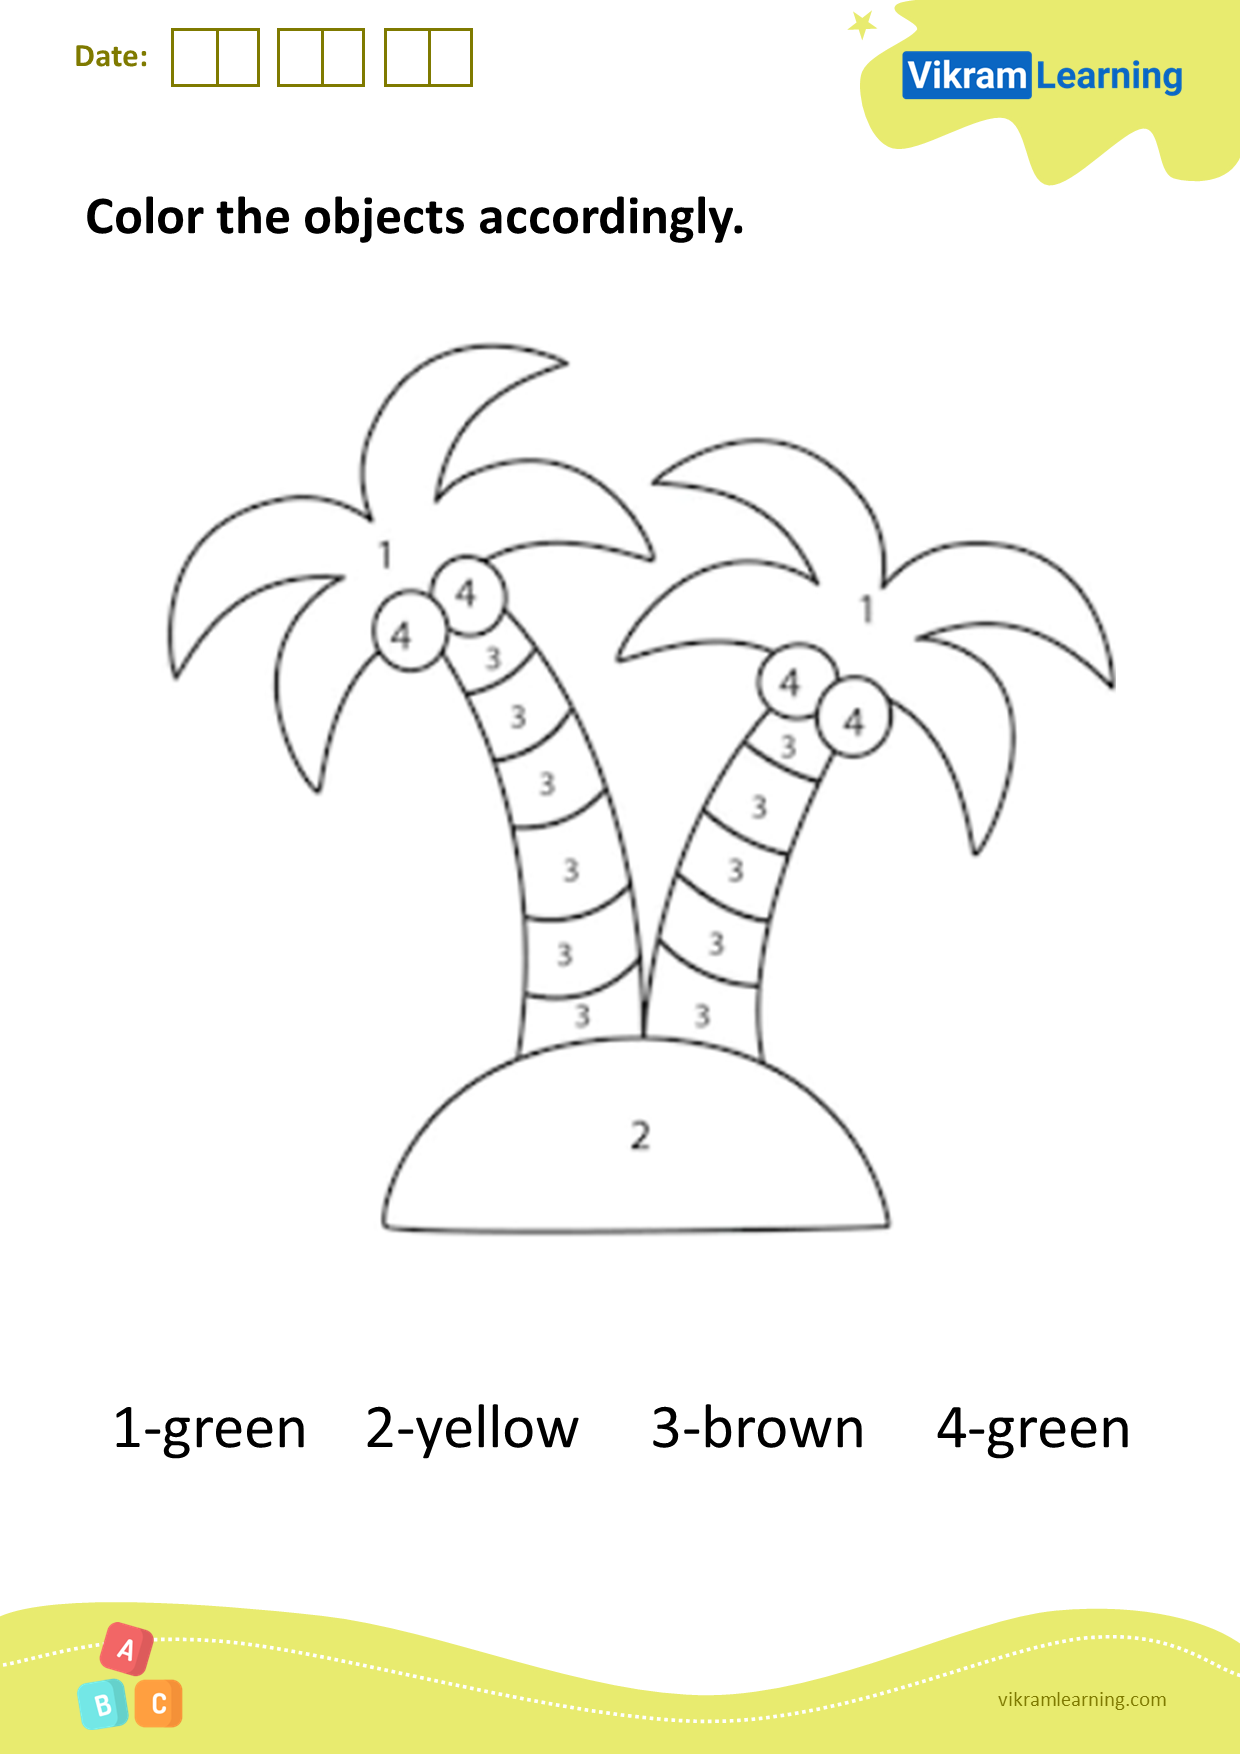 Download color the objects accordingly worksheets